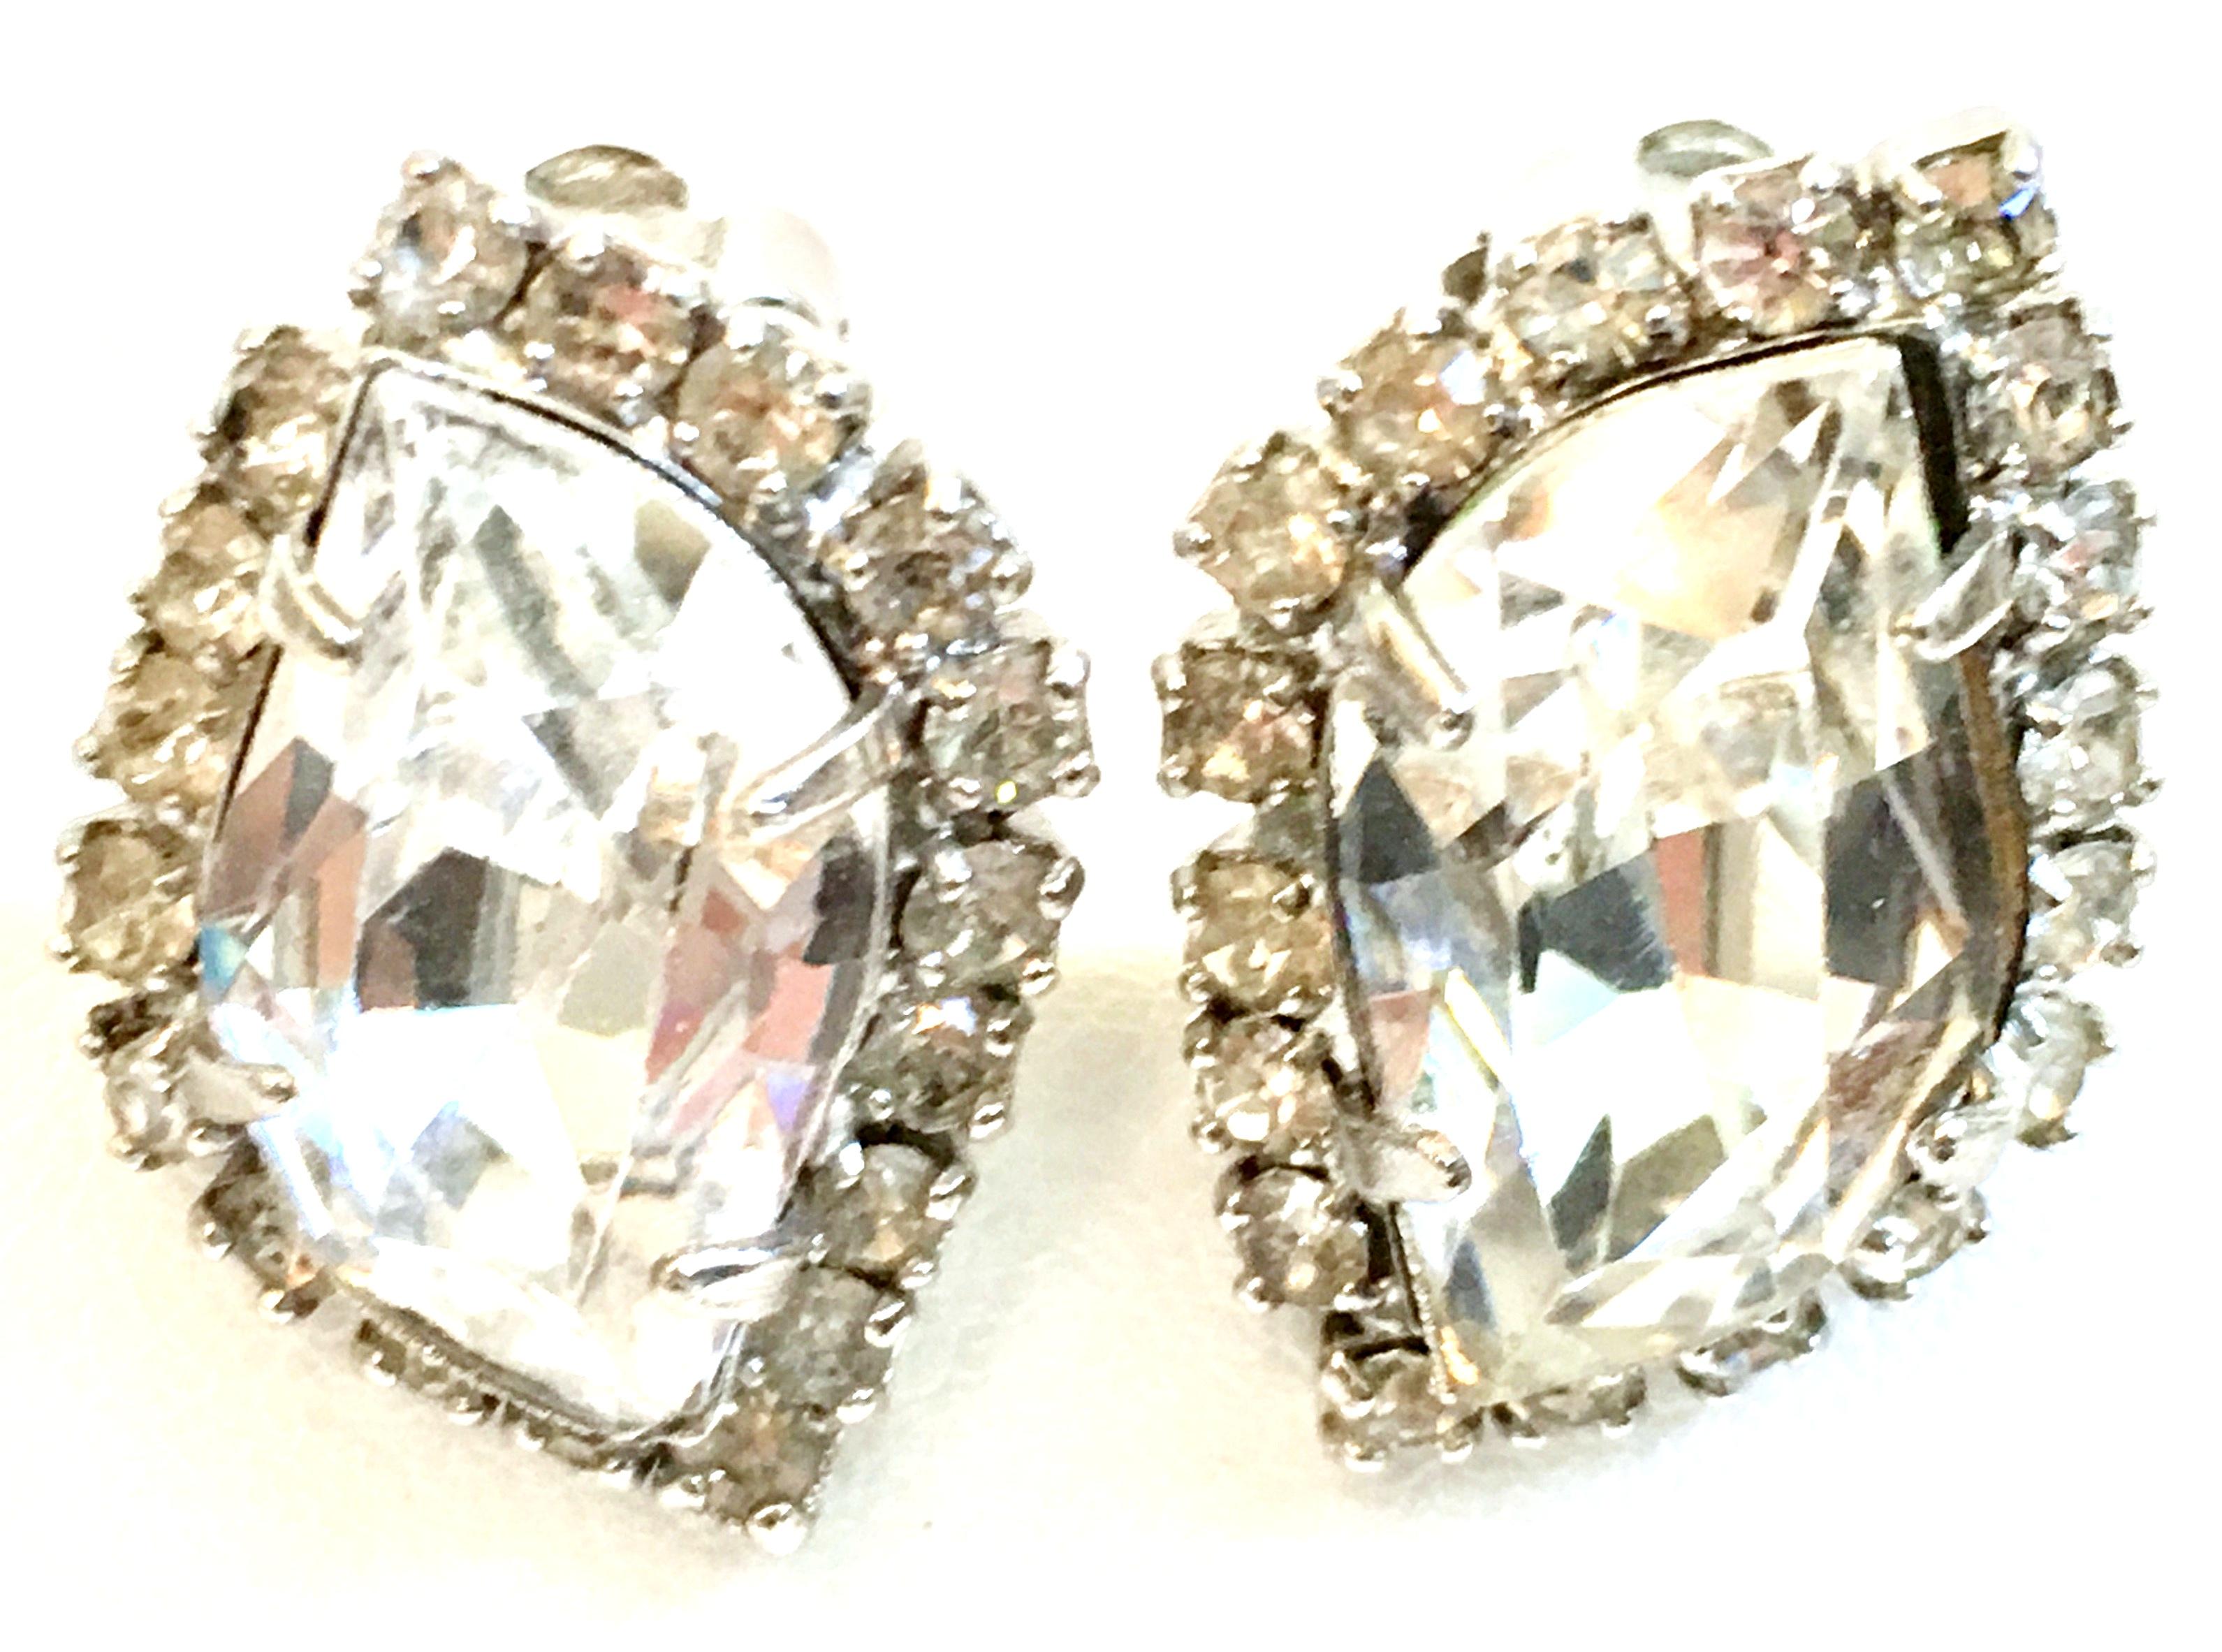 1960'S Pair Silver & Swarovski Crystal Rhinestone Earrings By, Weiss. Features silver rhodium plate and prong set brilliant Swarovski crystal clear large and rare irregular hexagon cut and faceted center stone, surround by round stones
These